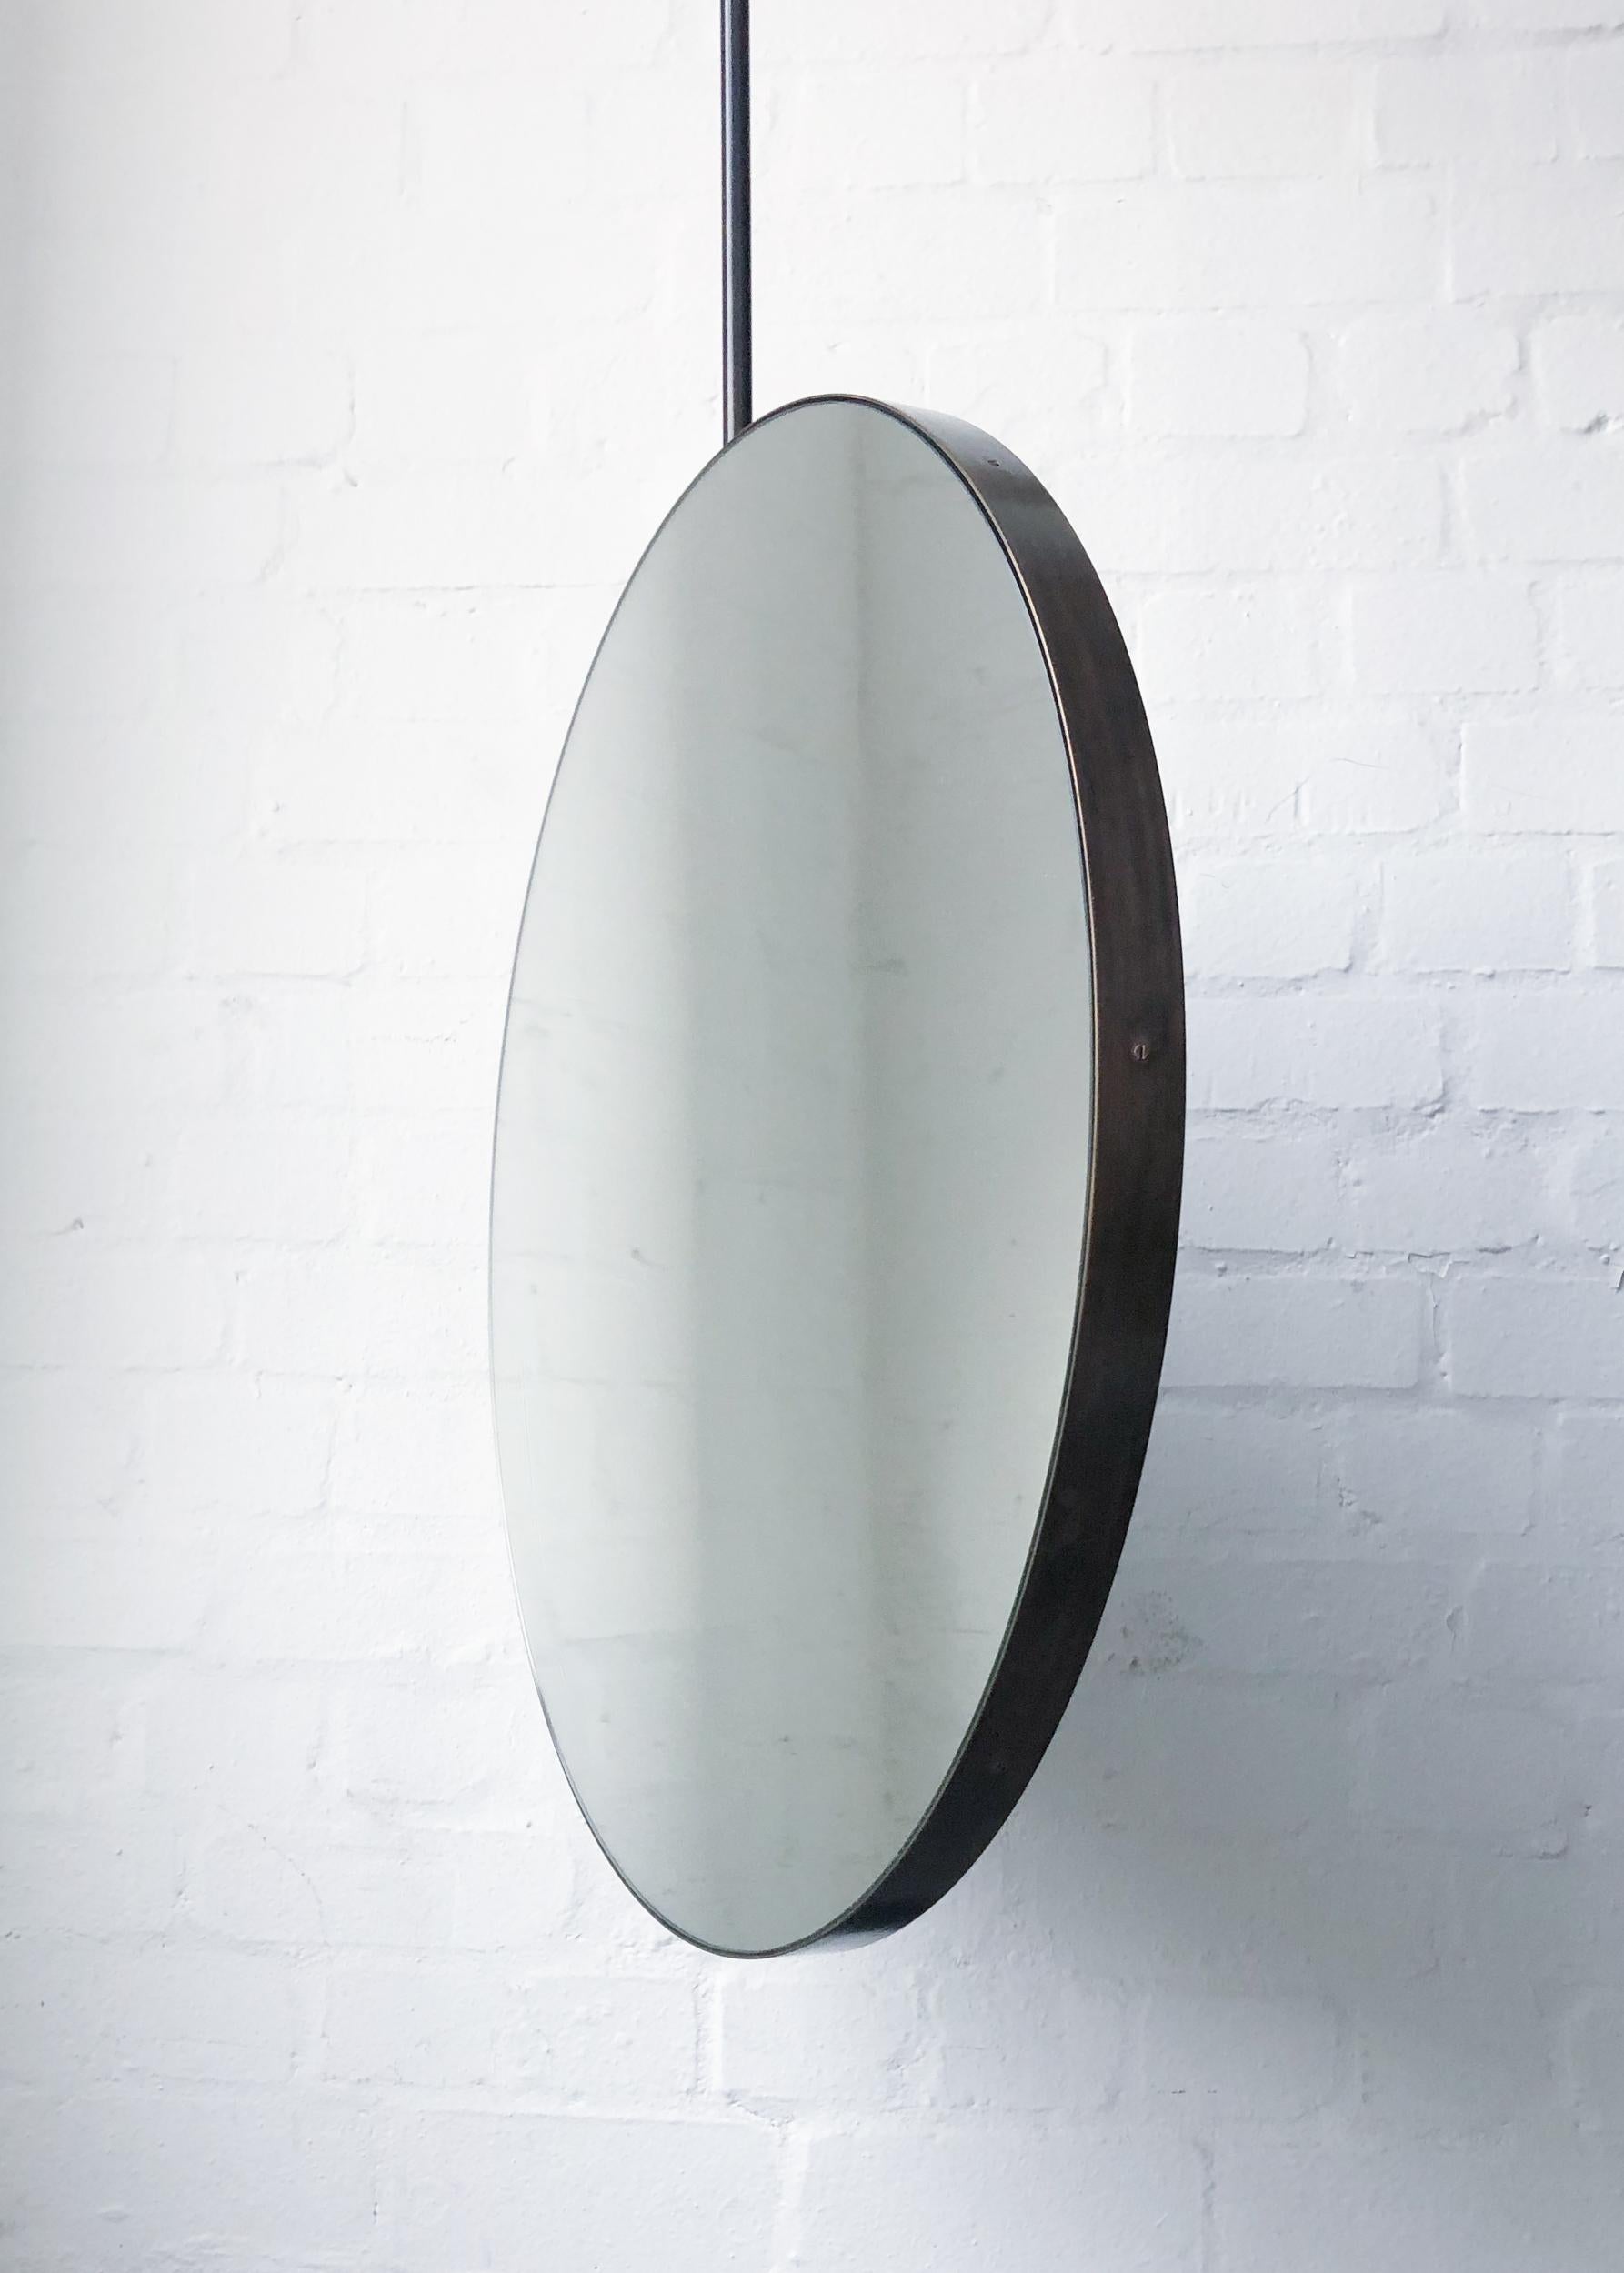 Unique and exquisite ceiling suspended round mirror with a brass frame finished with an elegant bronze patina.

550mm (21.65